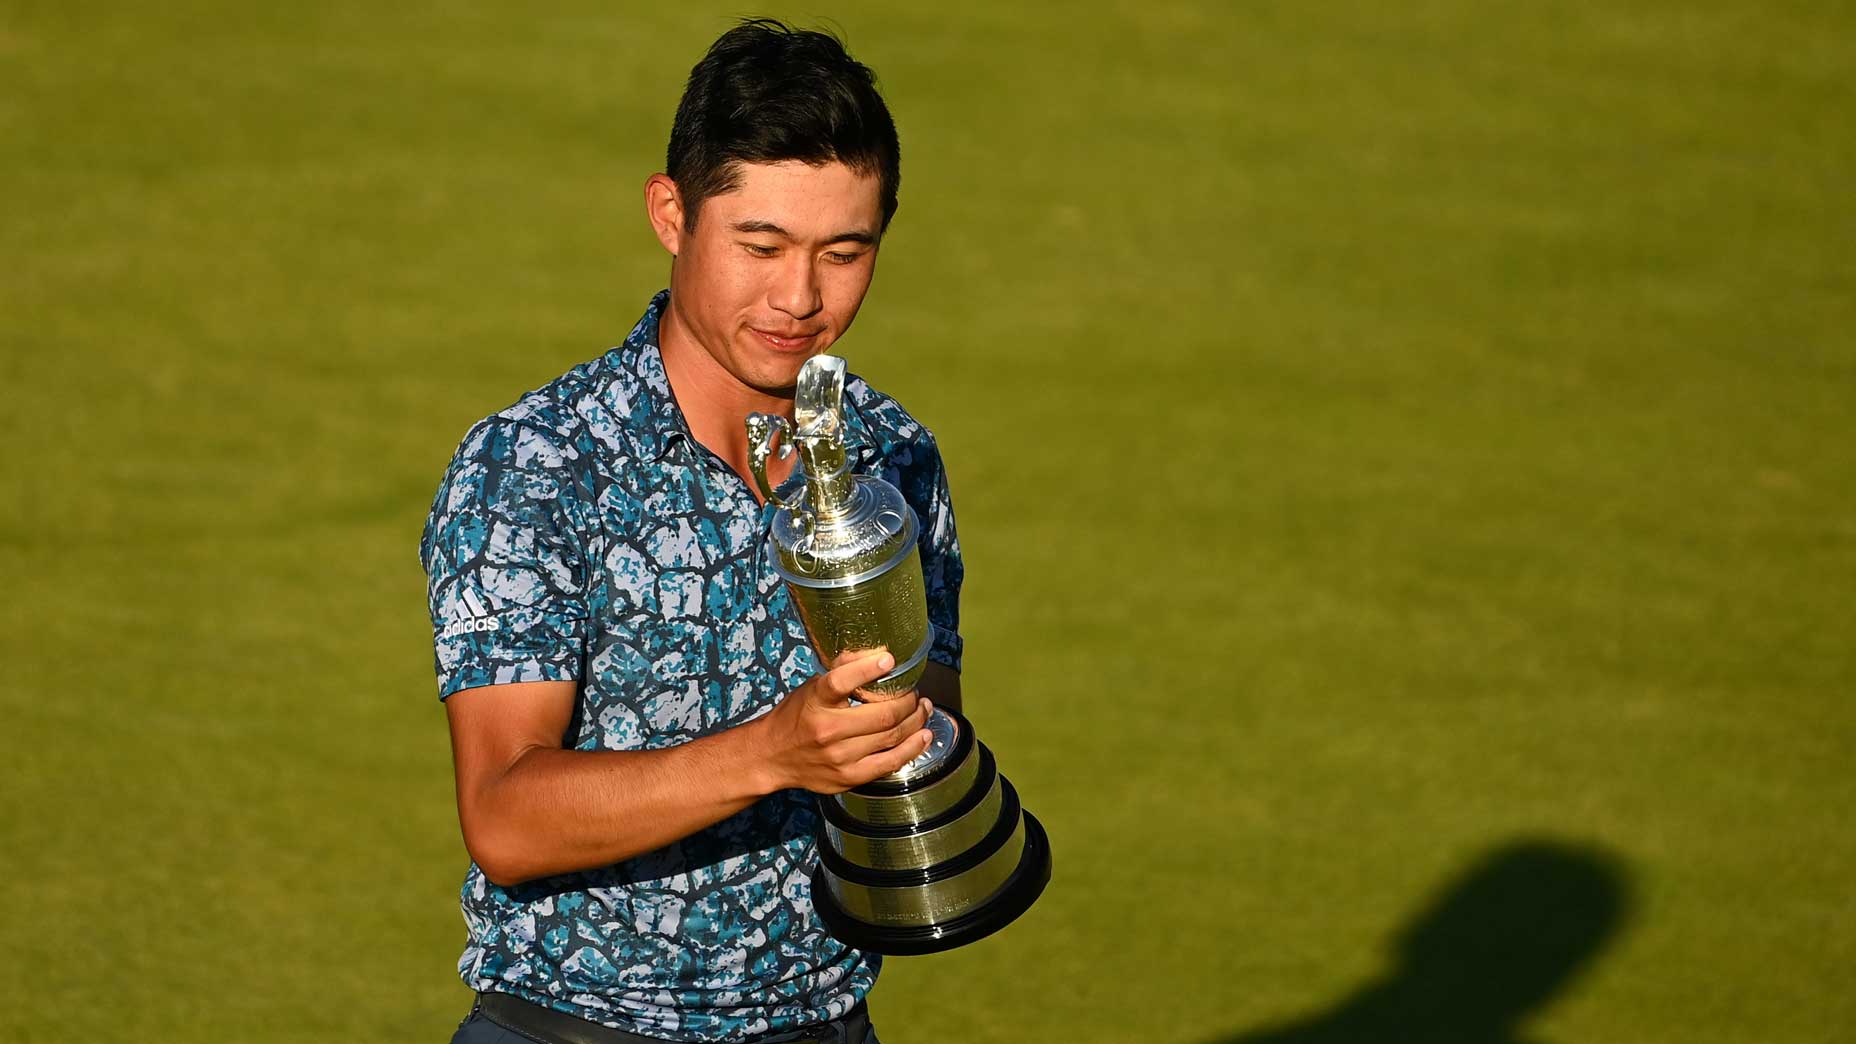 Relive Collin Morikawa's historic British Open win with these 10 pictures